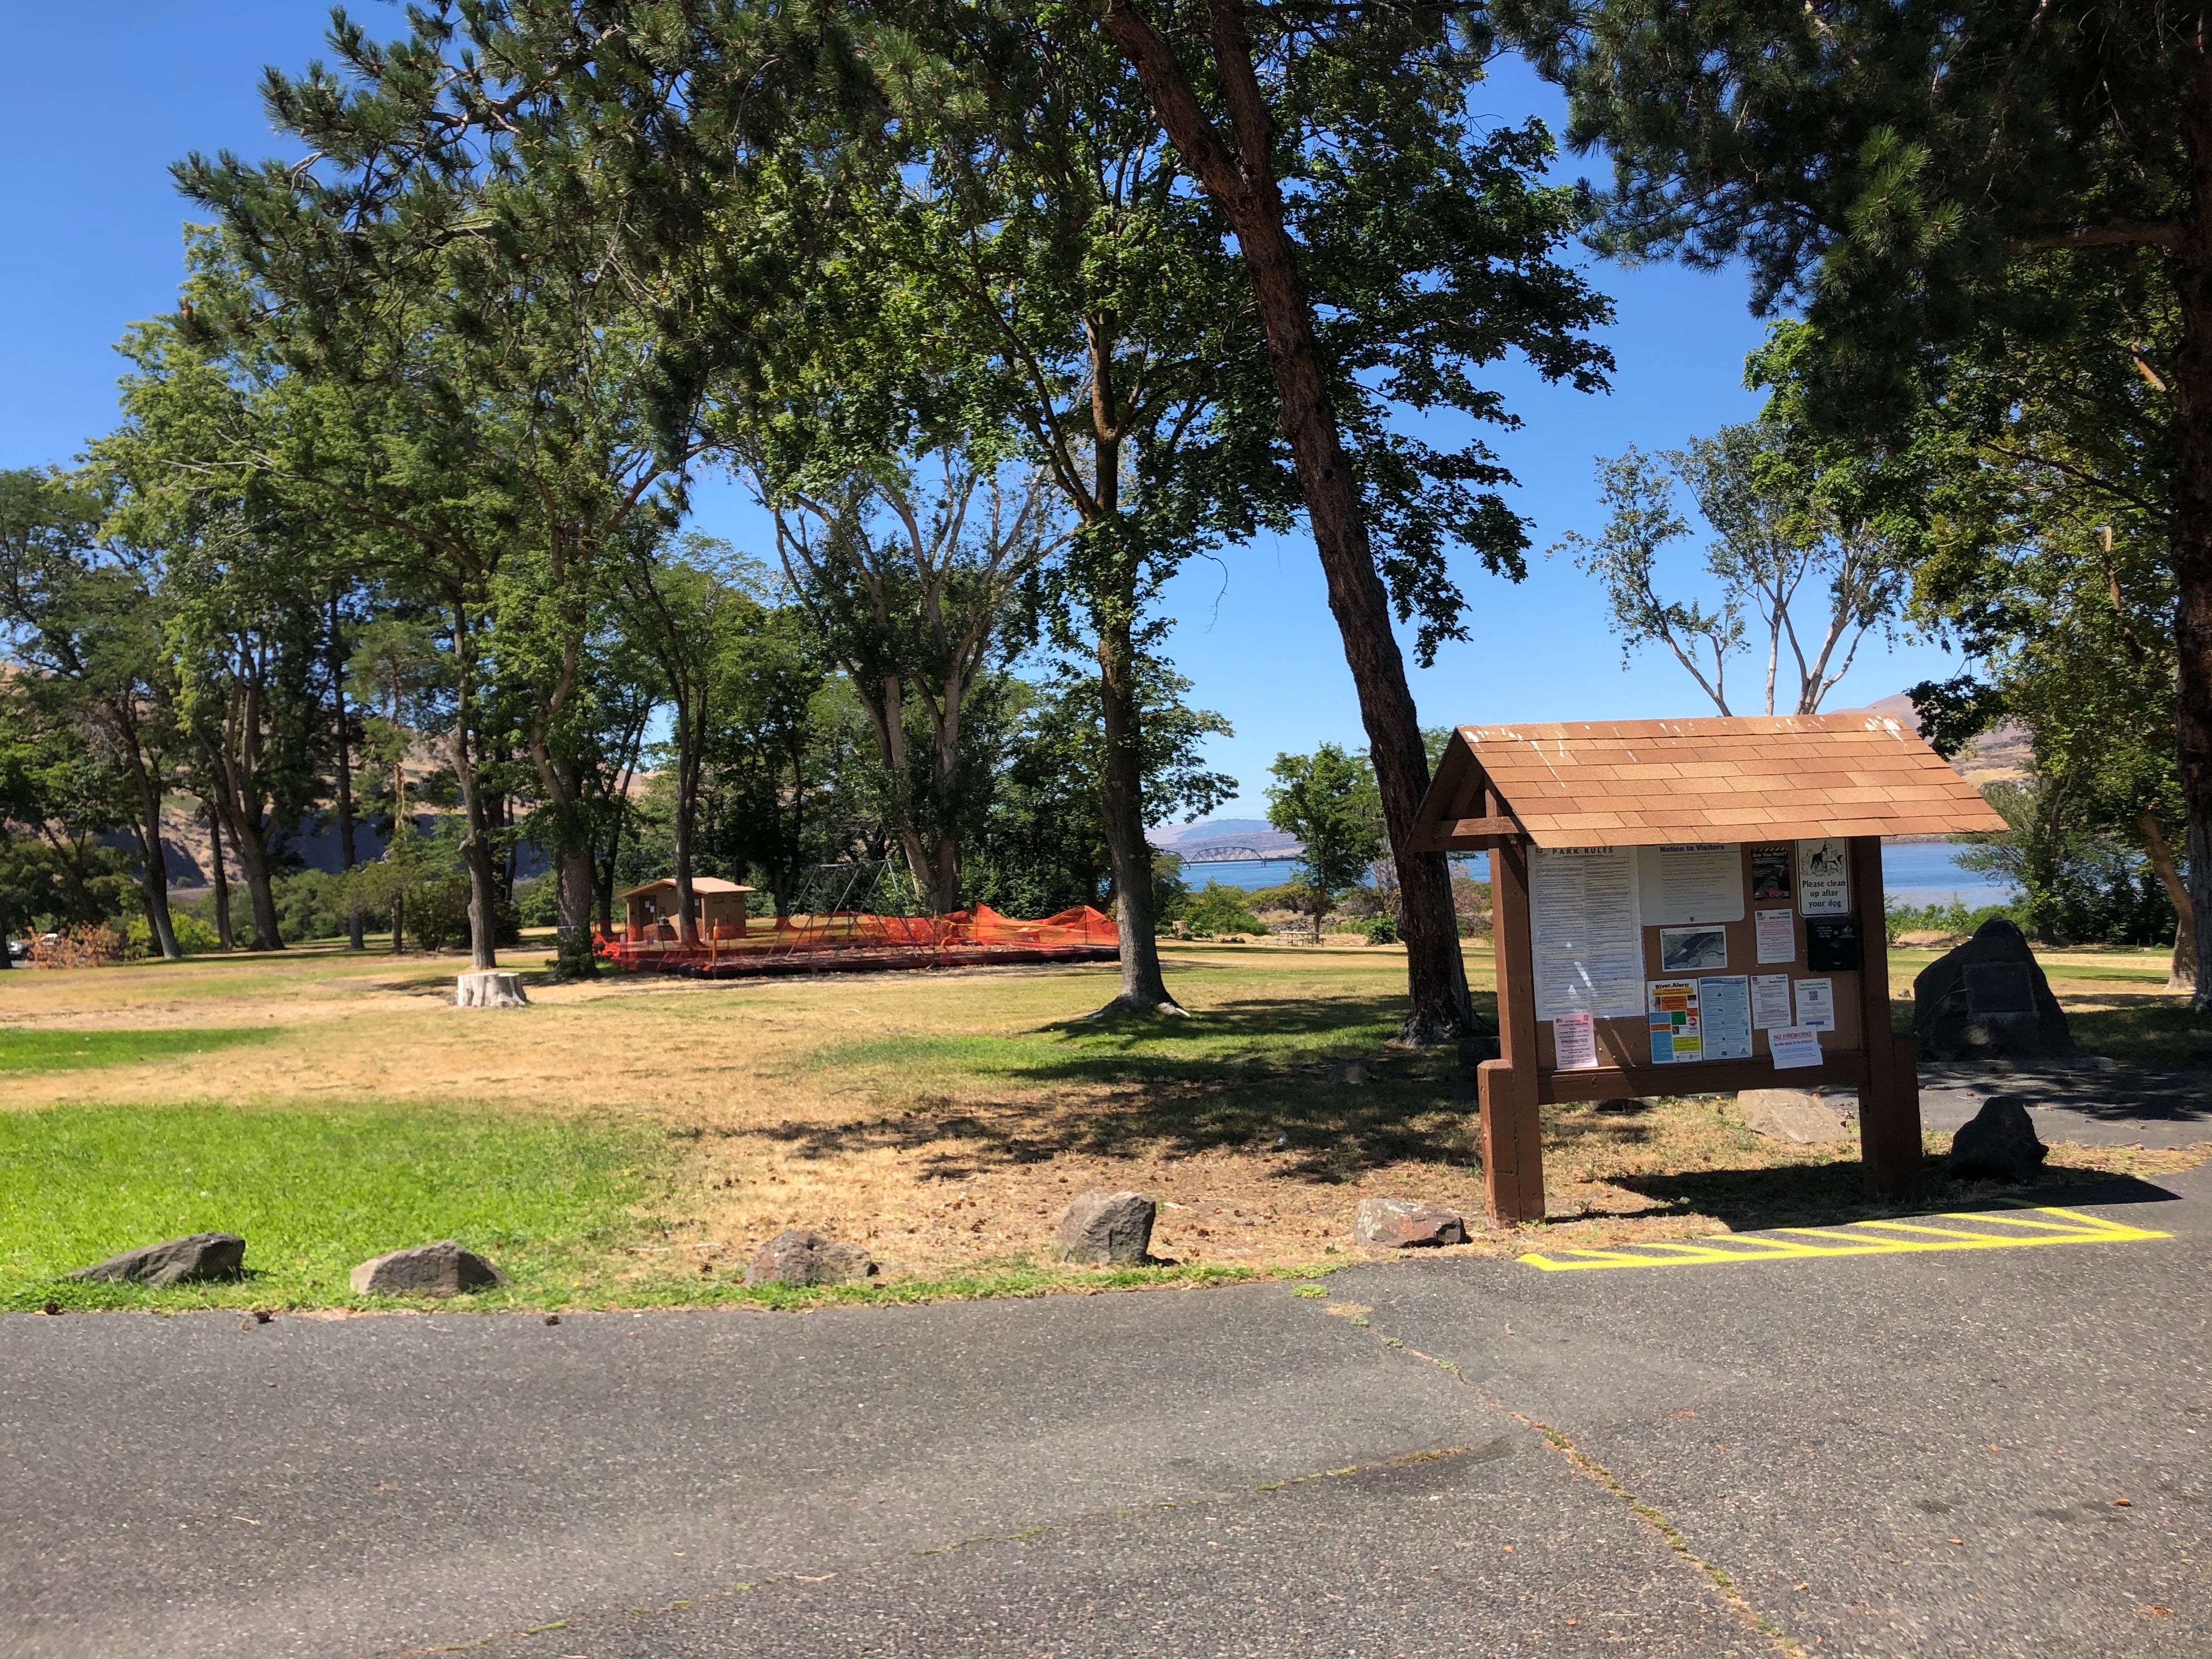 Camper submitted image from Celilo Park Recreation Area - 1